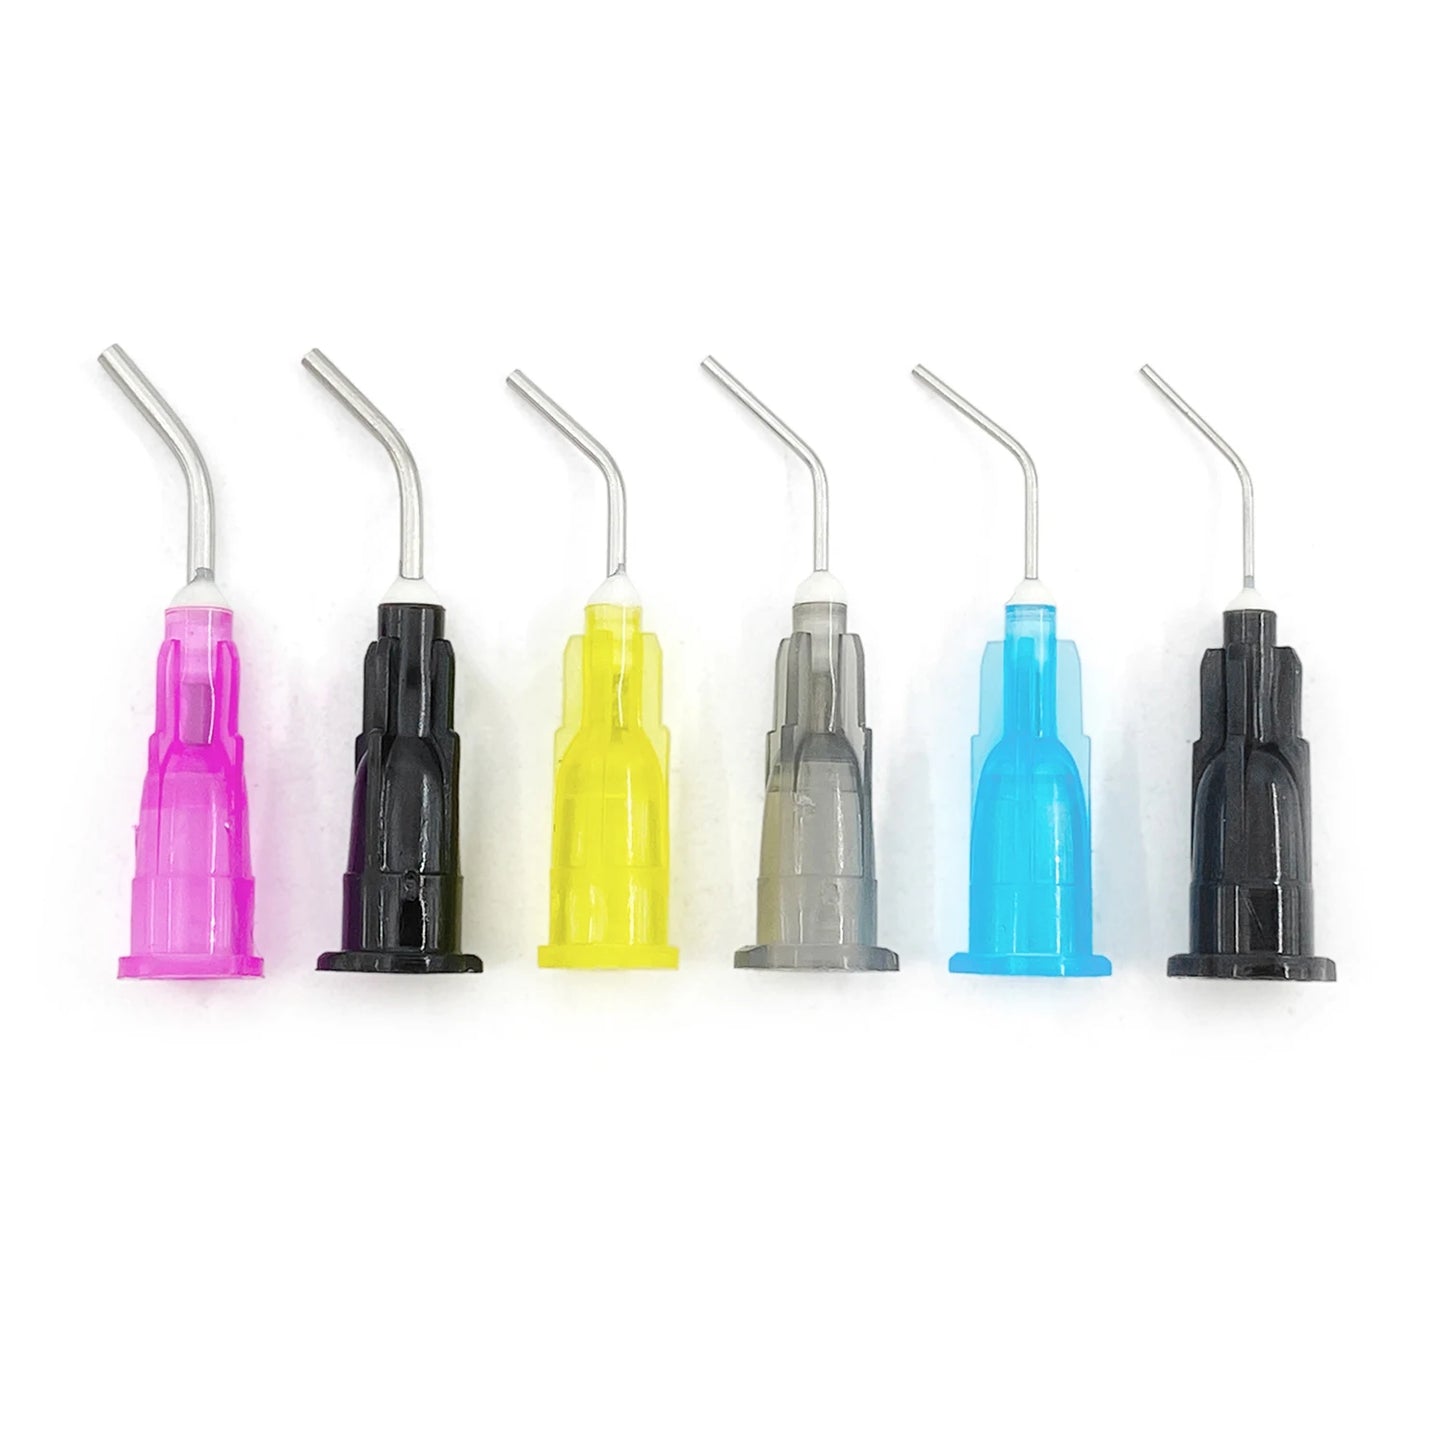 Disposable Multi-Purpose Needle Tips - 100pcs | High Quality & Accurate Dispensing